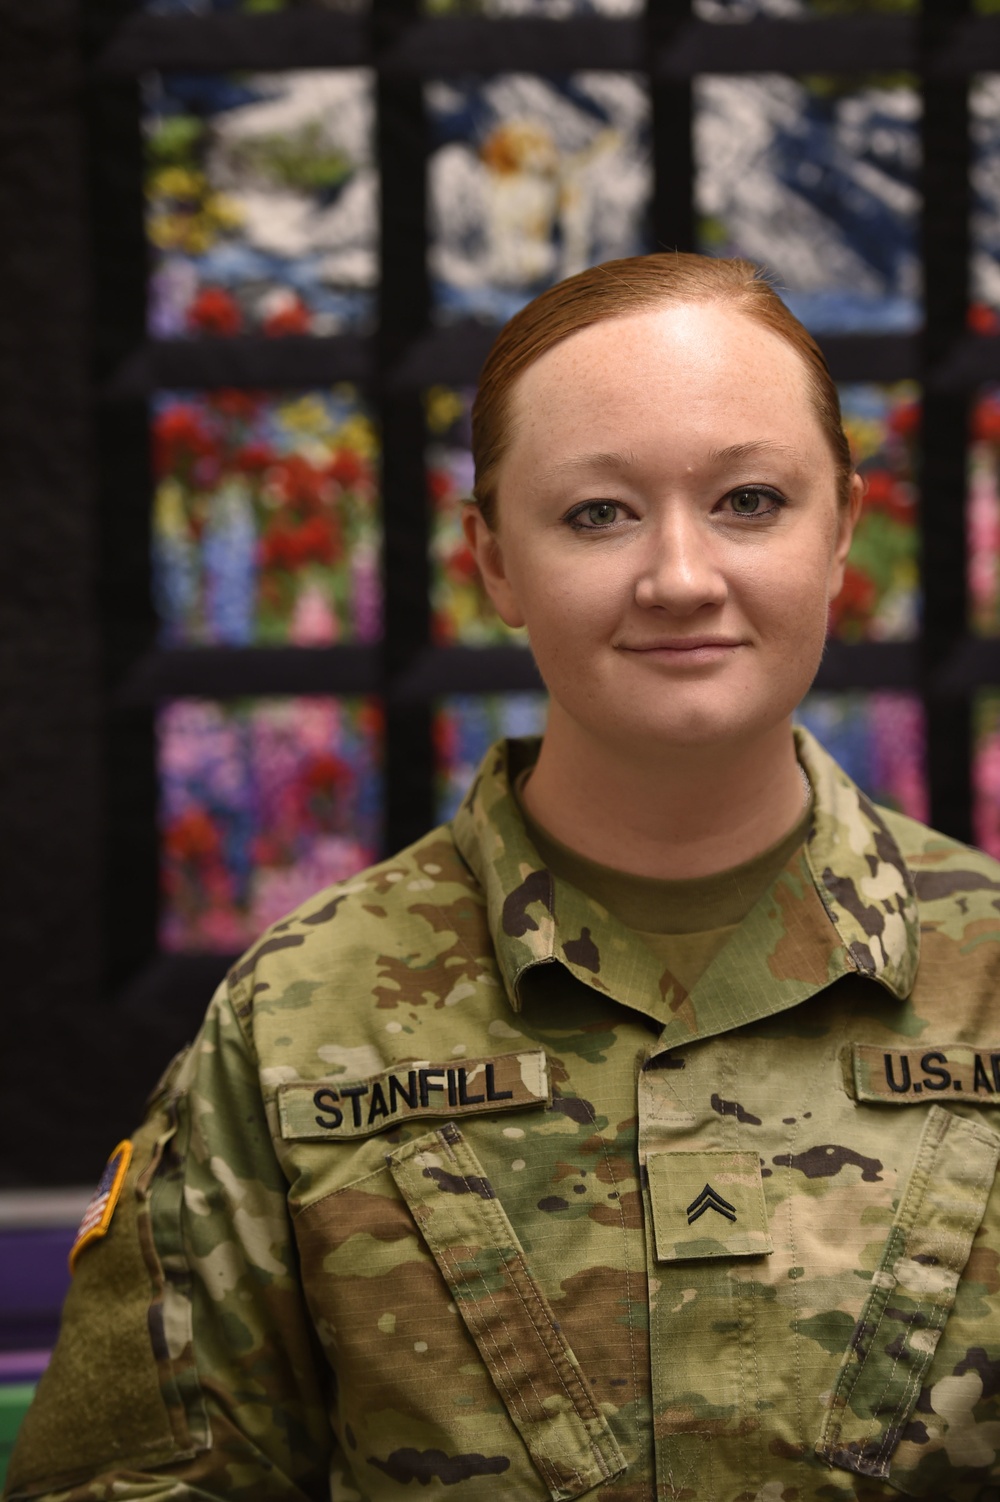 Stanfill deploys faith before first deployment